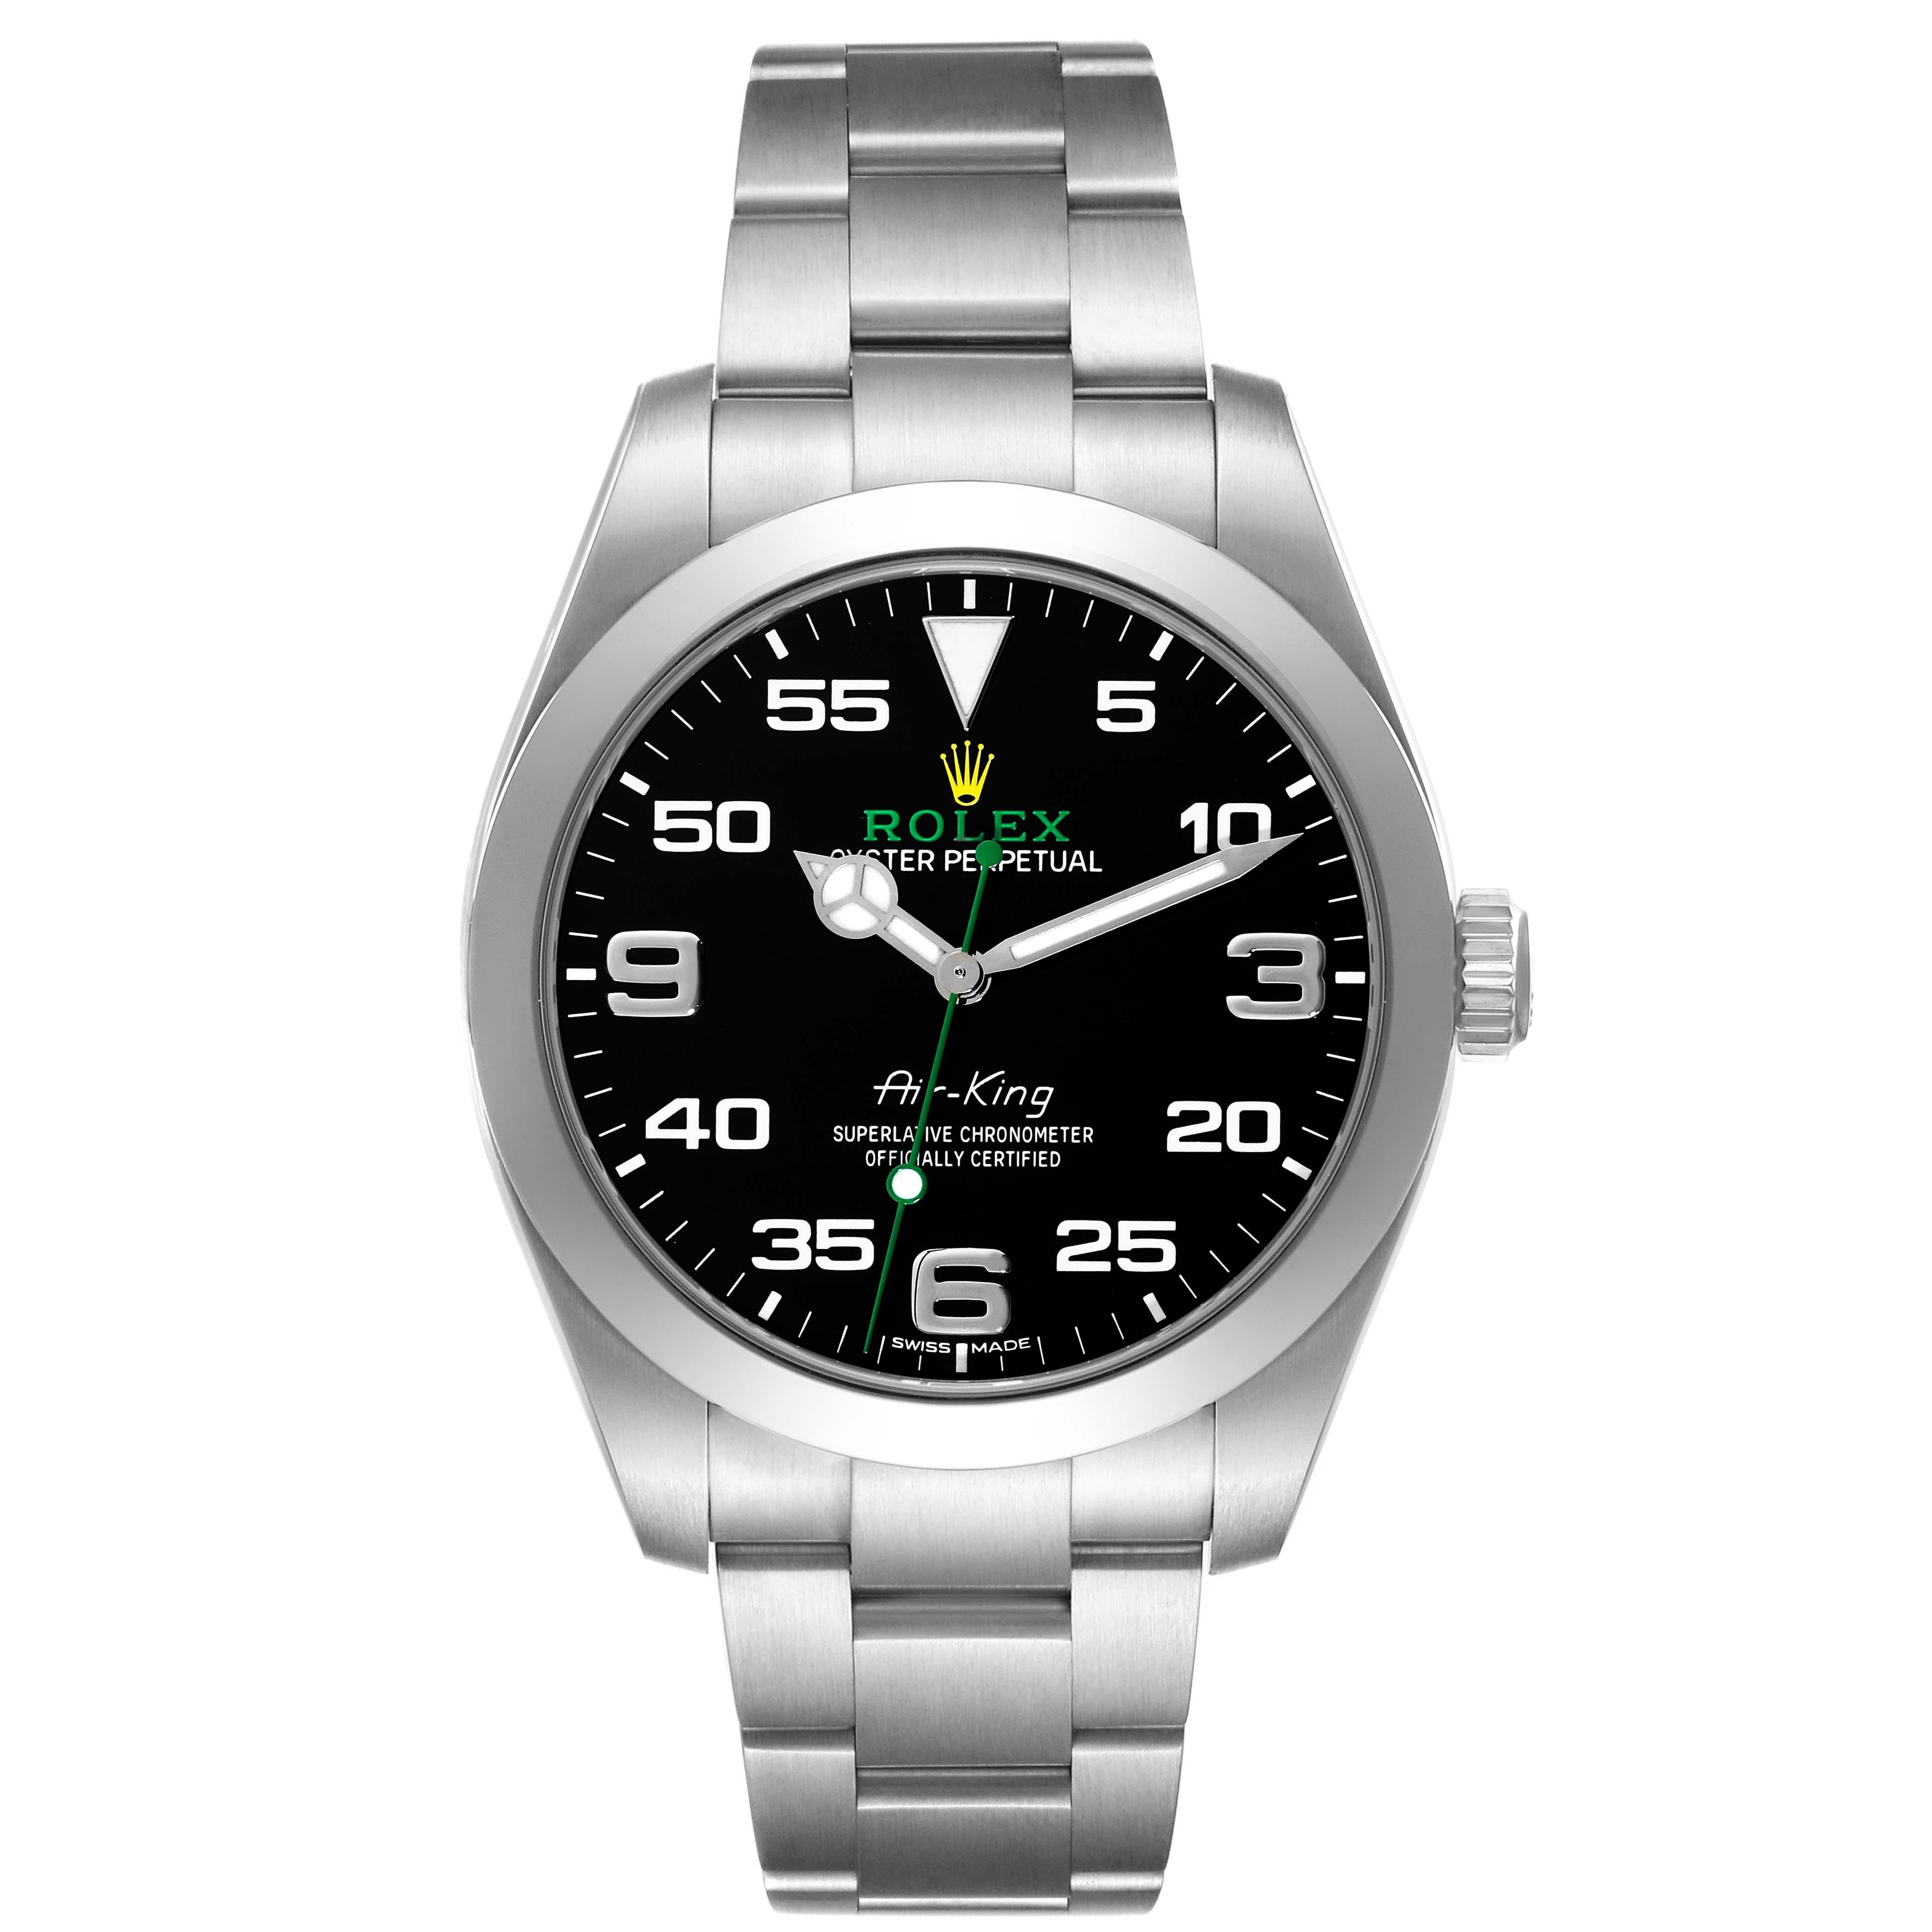 Rolex Oyster Perpetual Air King Green Hand Steel Mens Watch 116900 Box Card. Officially certified chronometer automatic self-winding movement. Stainless steel case 40.0 mm in diameter. Rolex logo on the crown. Stainless steel smooth domed bezel.